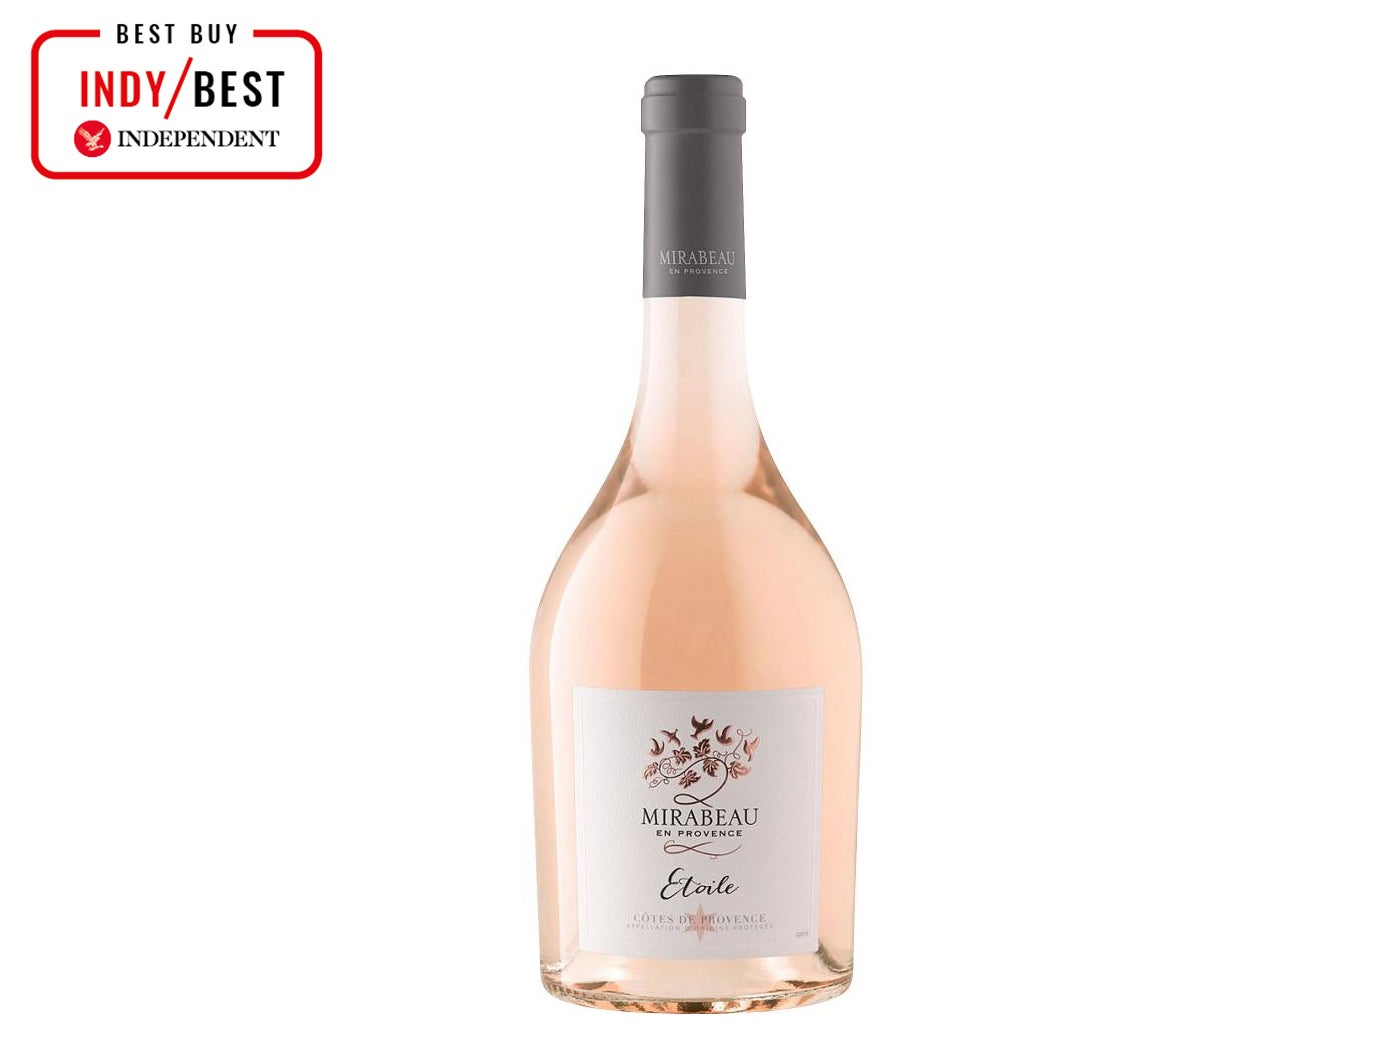 sip the wines to The Best de whatever | Provence Côtes Independent rosé weather